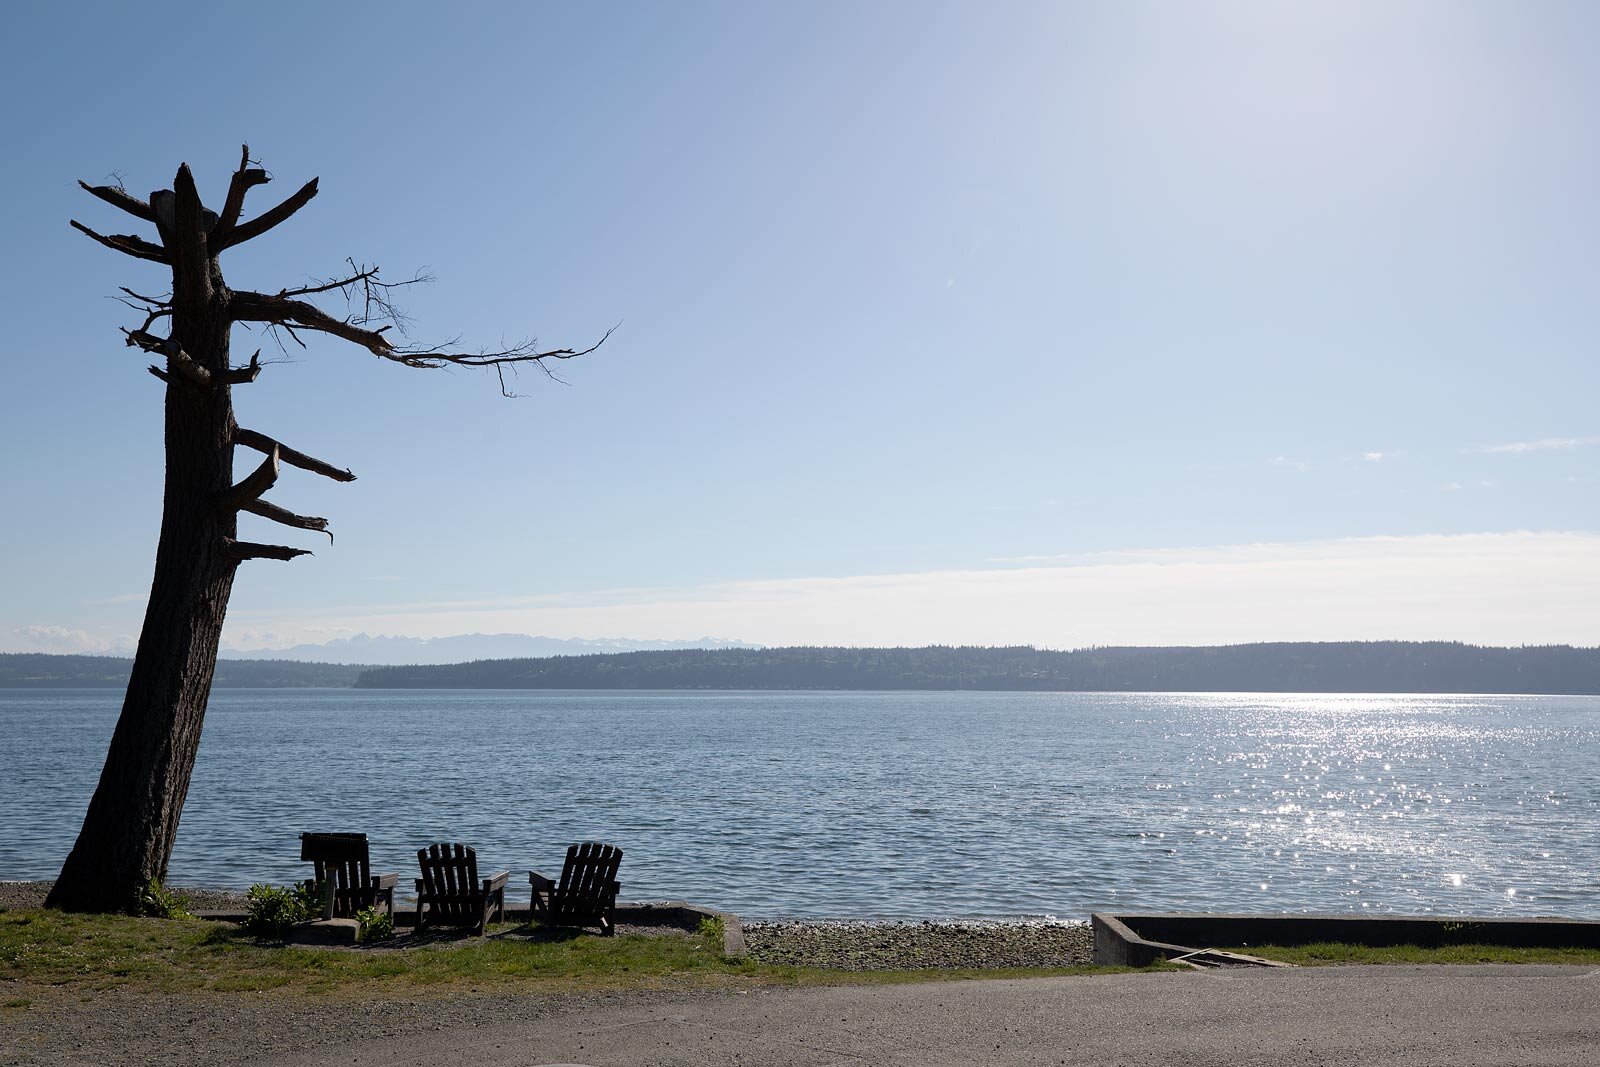 Camano Island beach with a view of the puget sound and Whidbey Island
